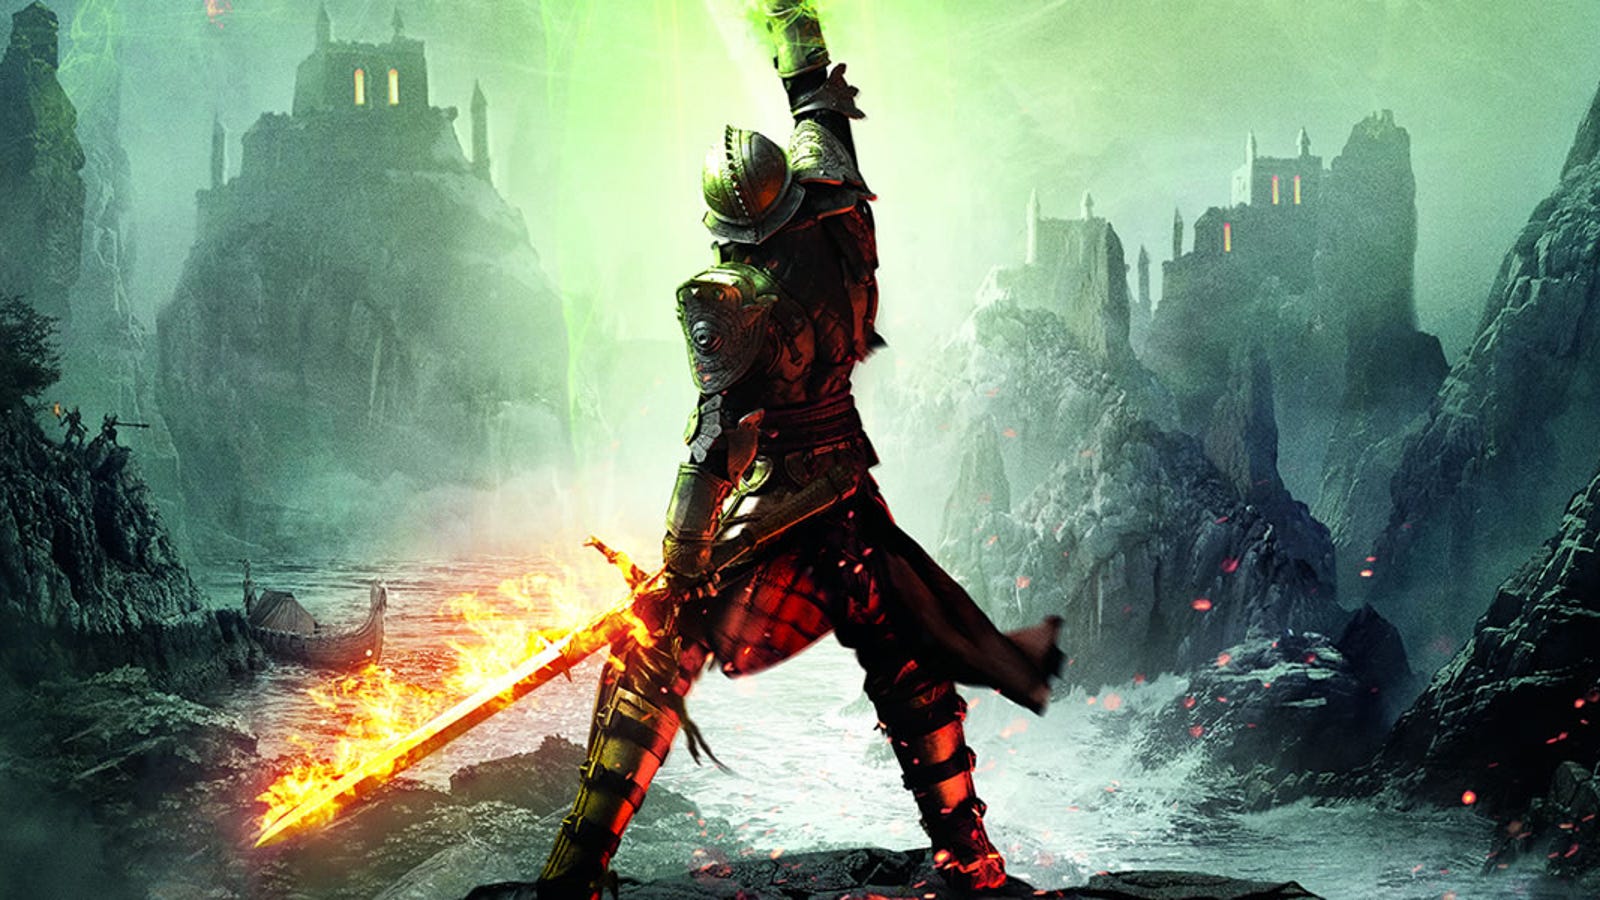 Dragon Age: Inquisition Benchmarked: Graphics And CPU Performance